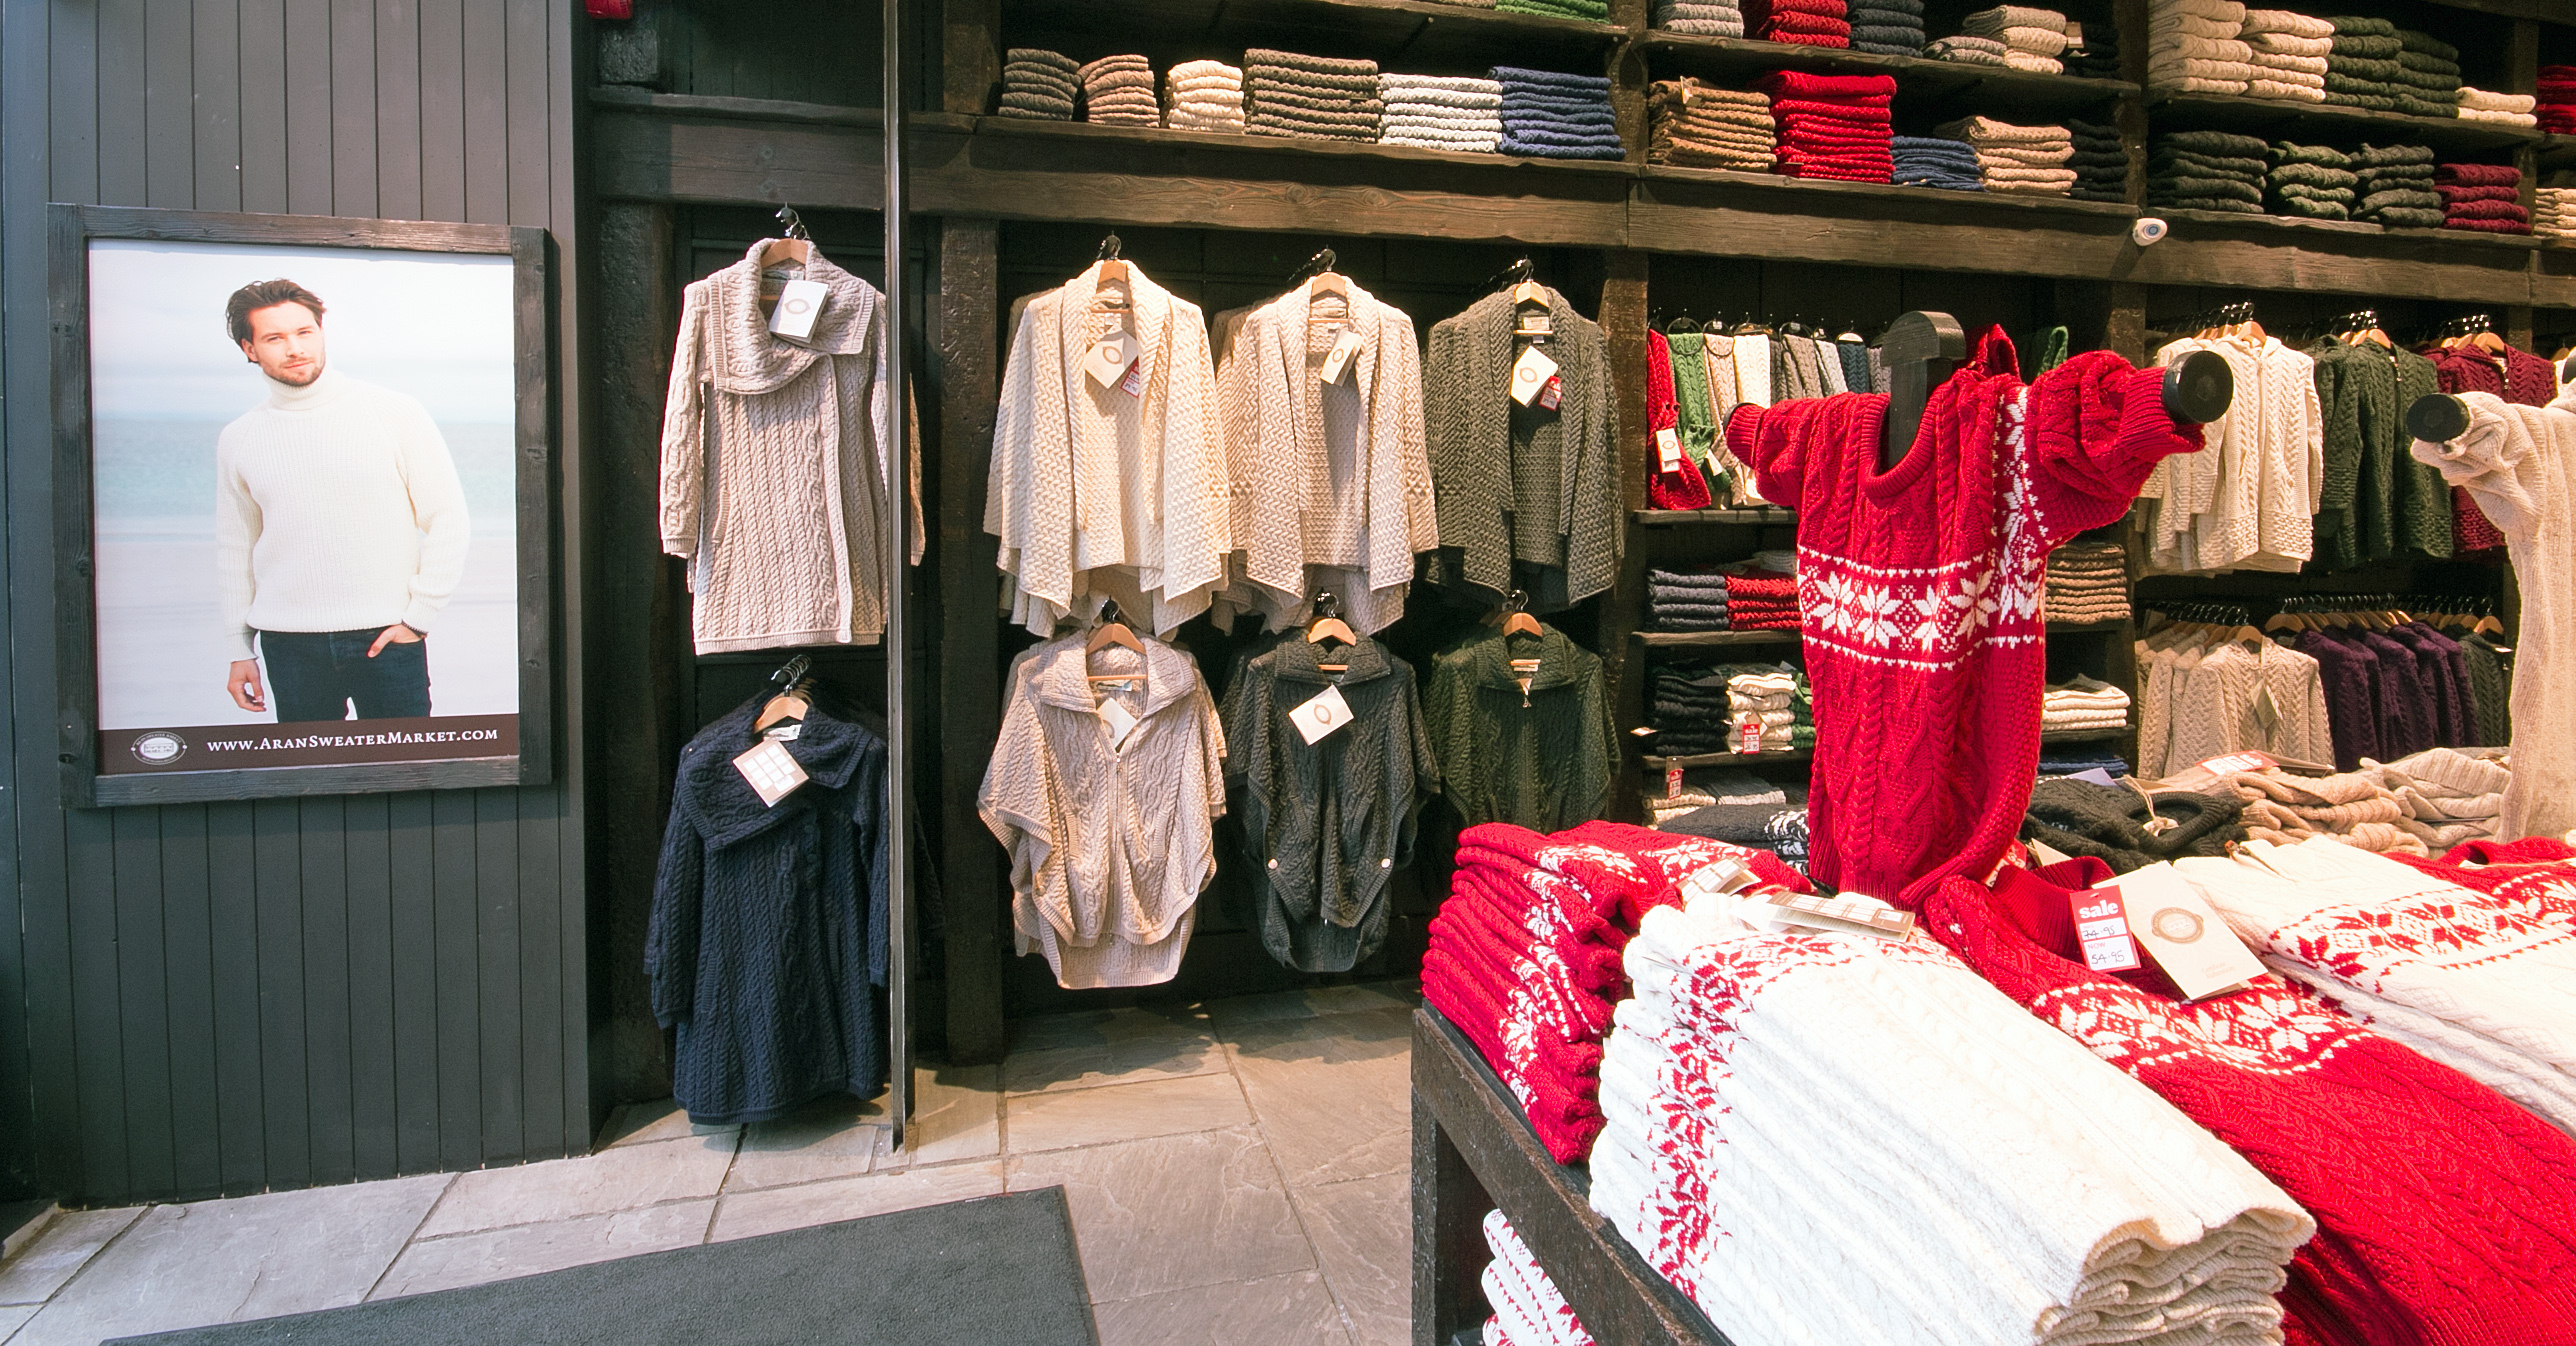 Sweater display and wall graphic in the Aran Sweater Market store